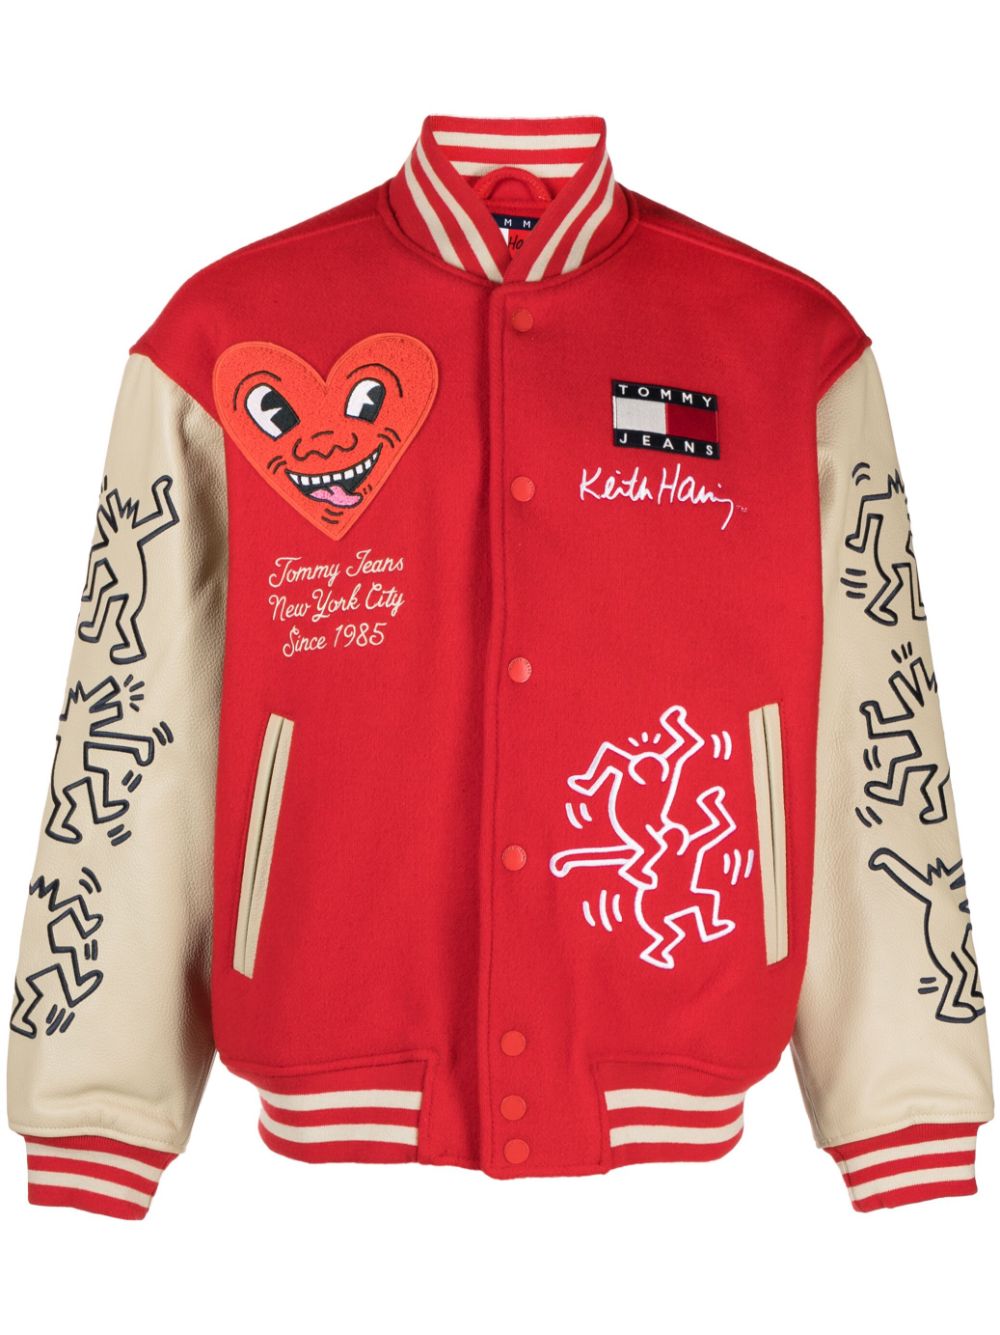 Tommy Jeans x Keith Haring Bomber Jacket - Farfetch